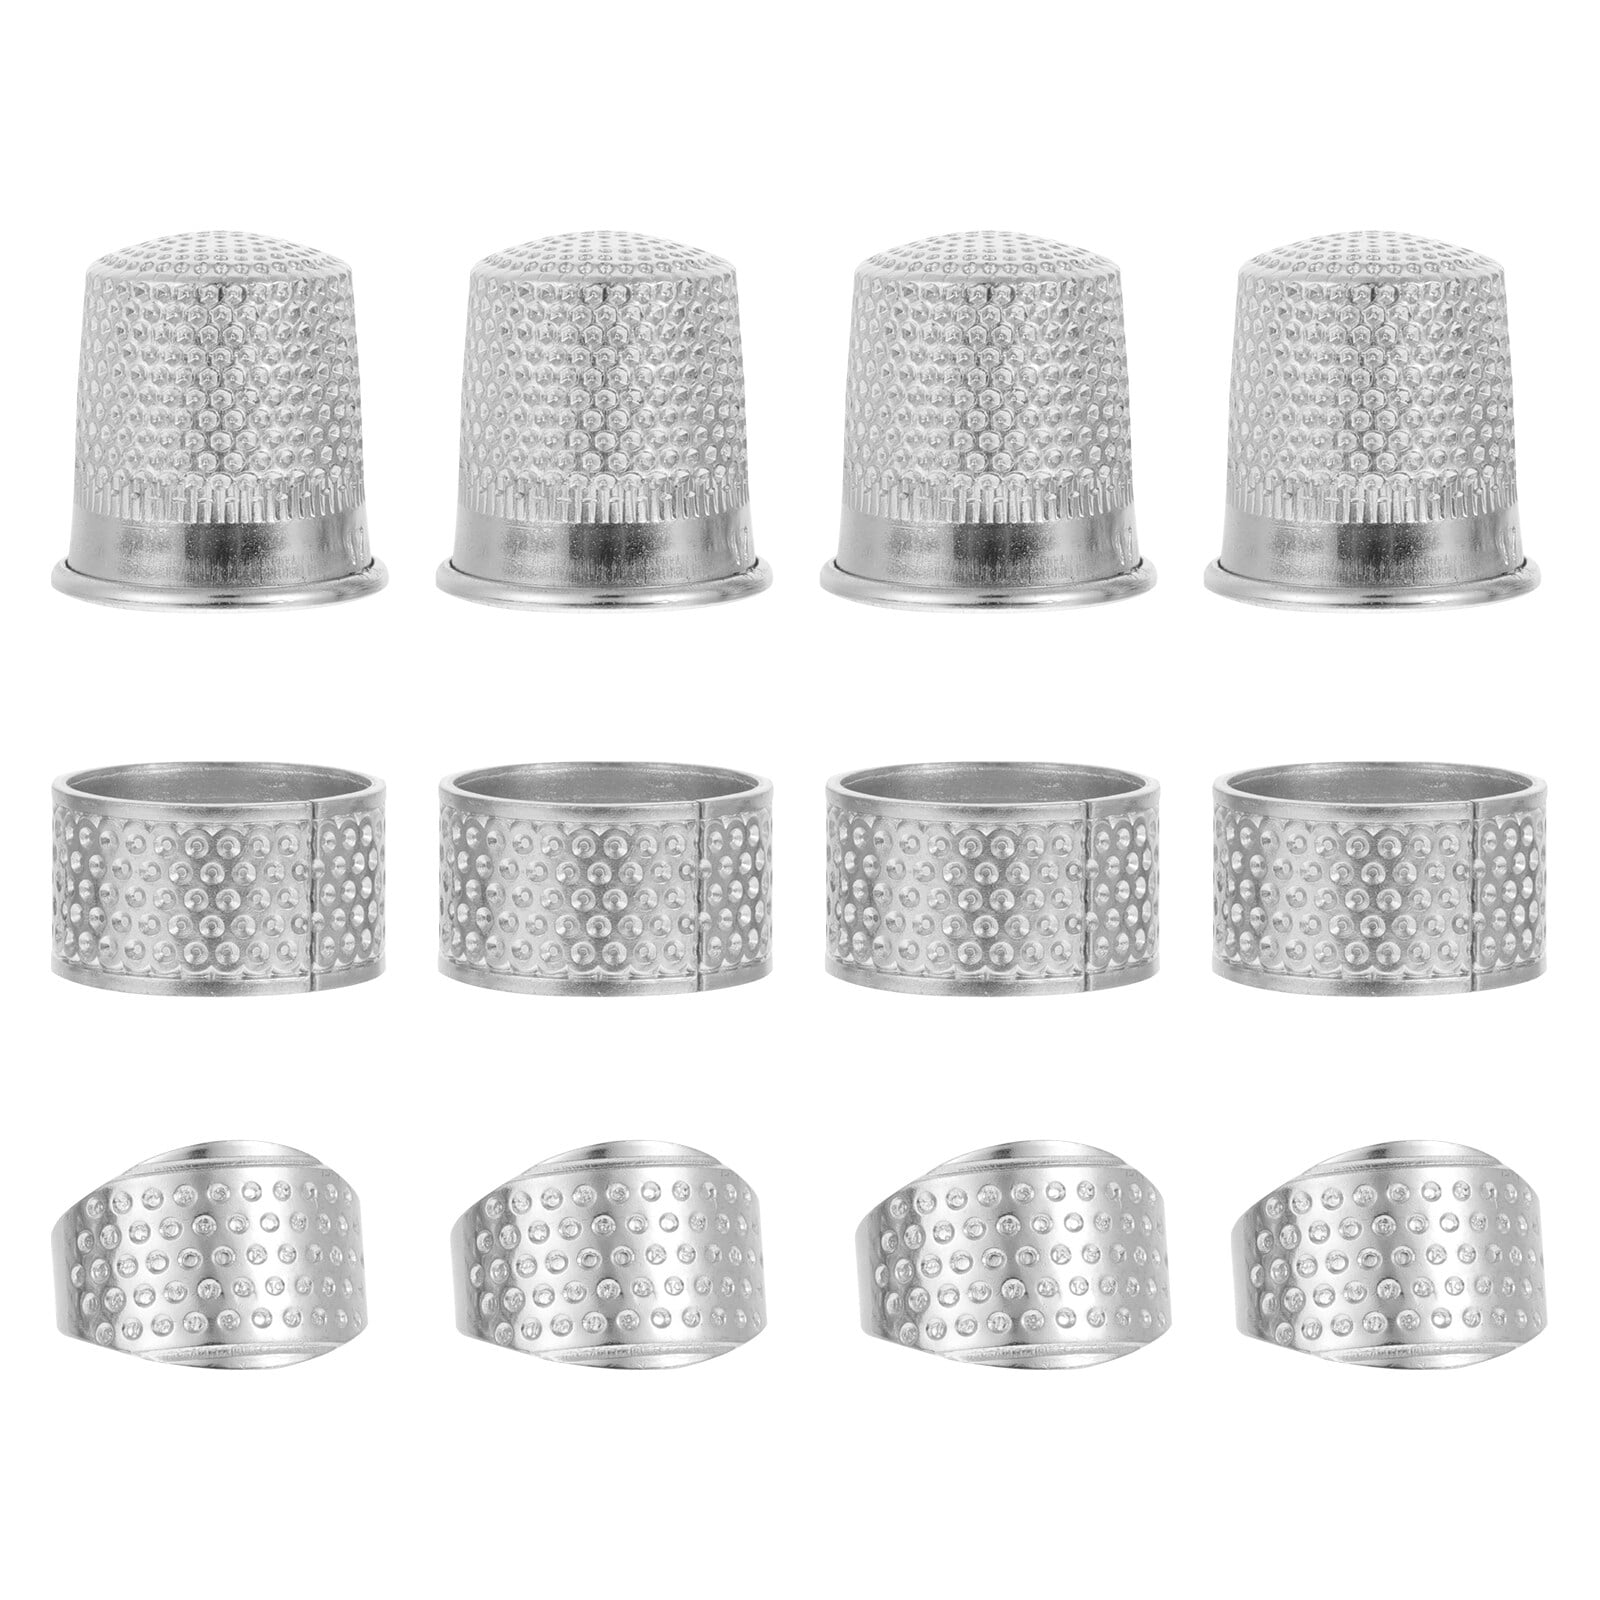 Sewing Thimble, Household Silicone Sewing Thimbles DIY Sewing Tools 2  Pieces Reusable for Fingers Thumb for Needlework Embroidery